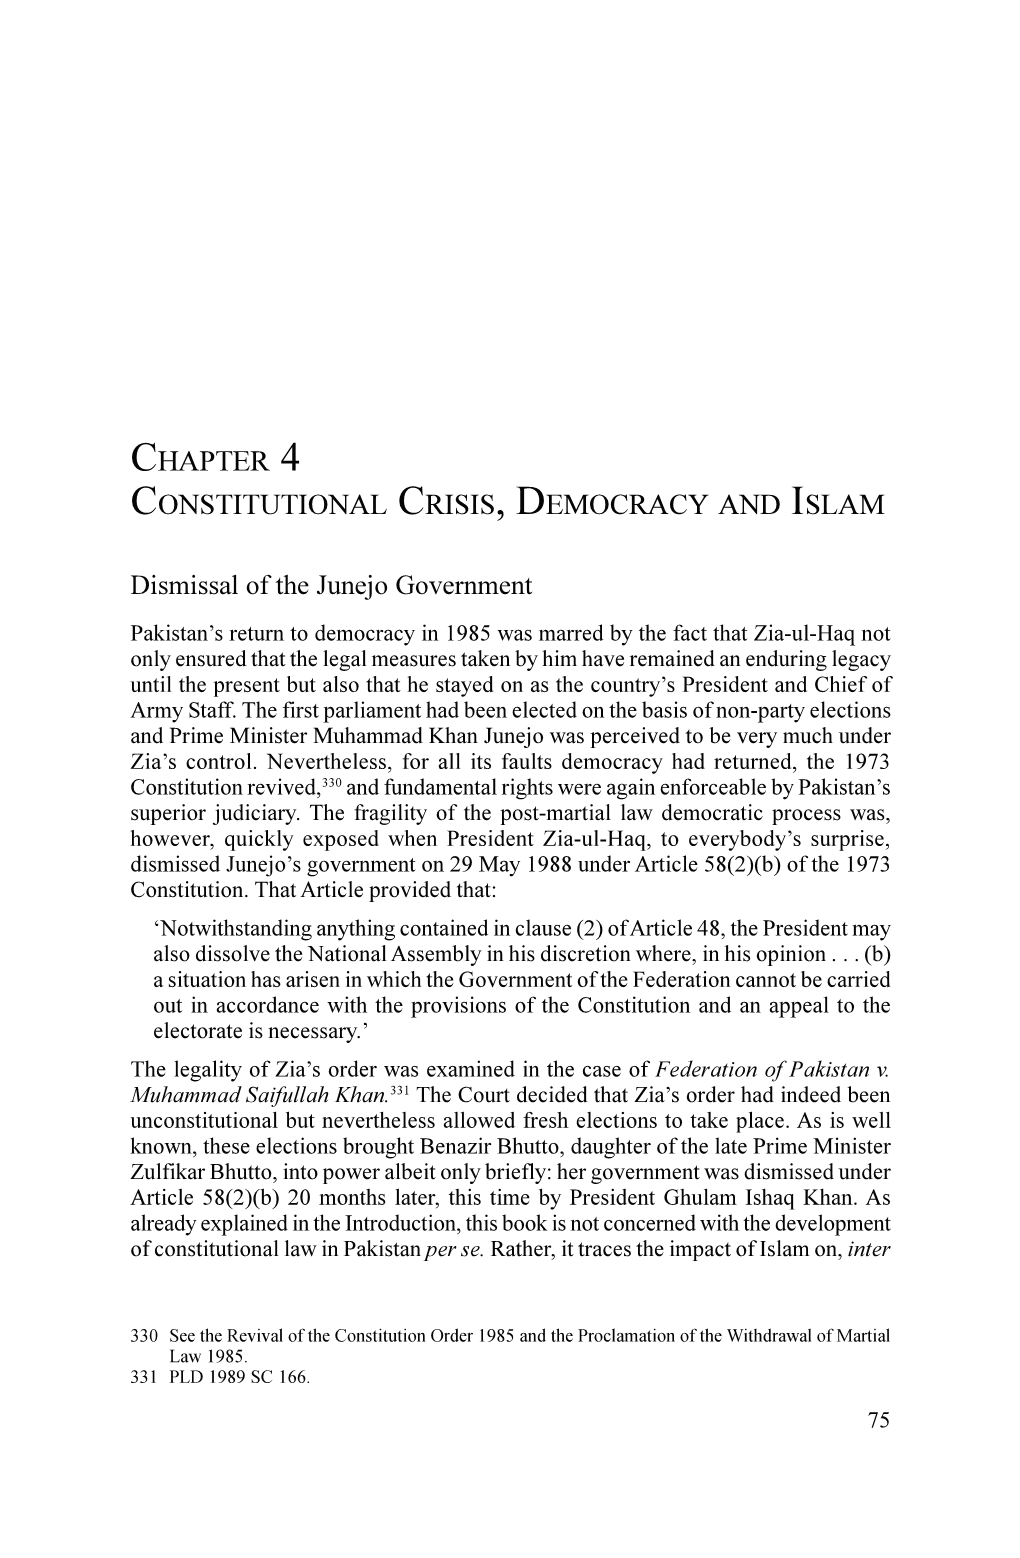 Chapter 4 Constitutional Crisis, Democracy and Islam